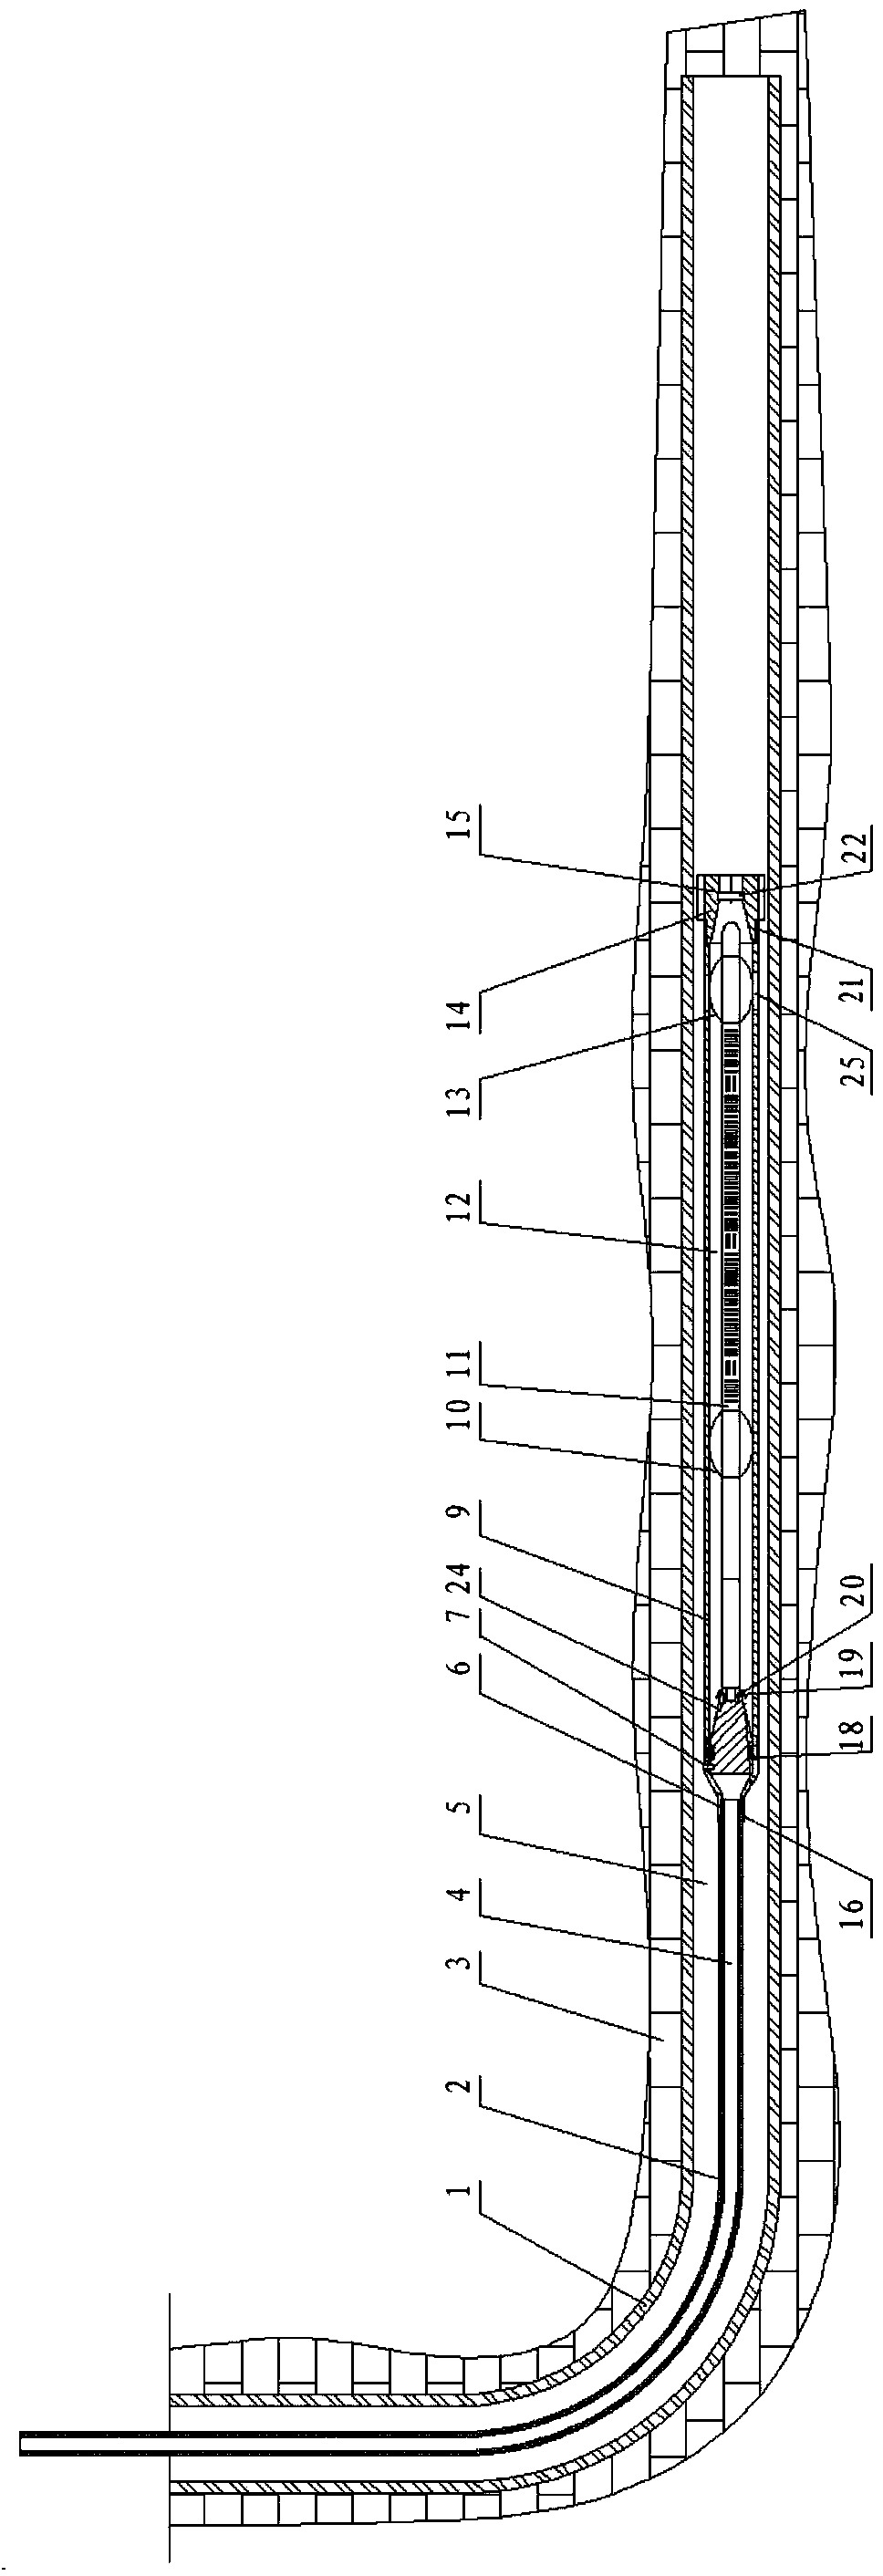 Device and method for integrating well dredging and well flushing, and well logging of cement bond well cementing quality